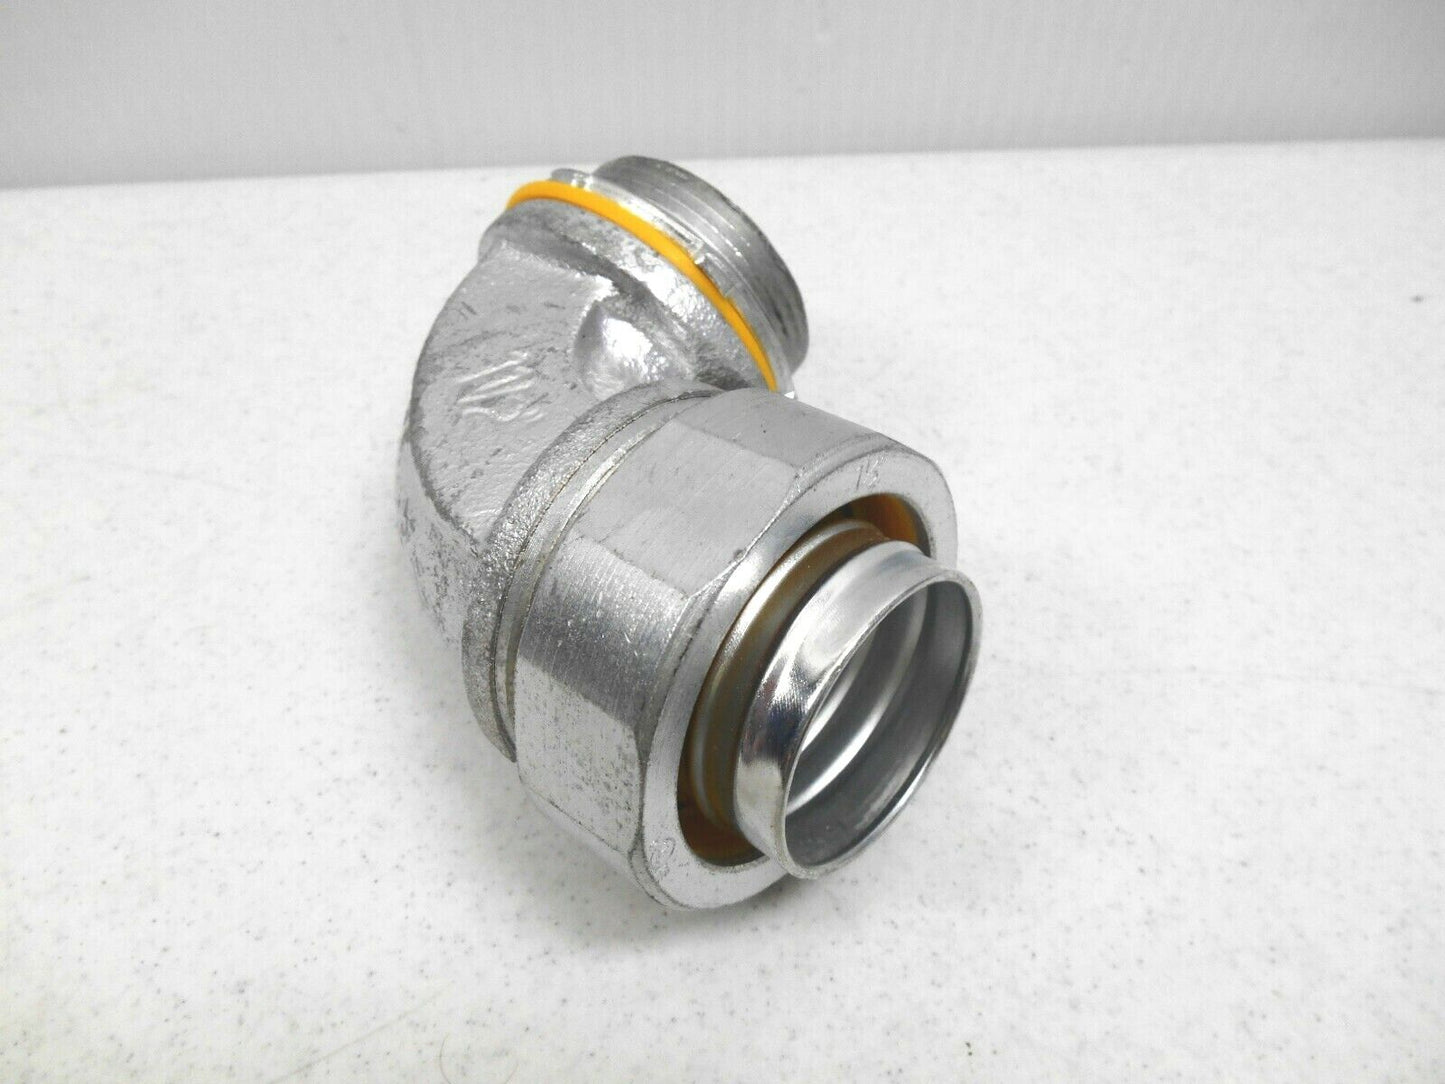 (1) CROUSE-HINDS LT15090 1-1/2" 90 DEGREE LIQUID TIGHT CONNECTOR UNINSULATED